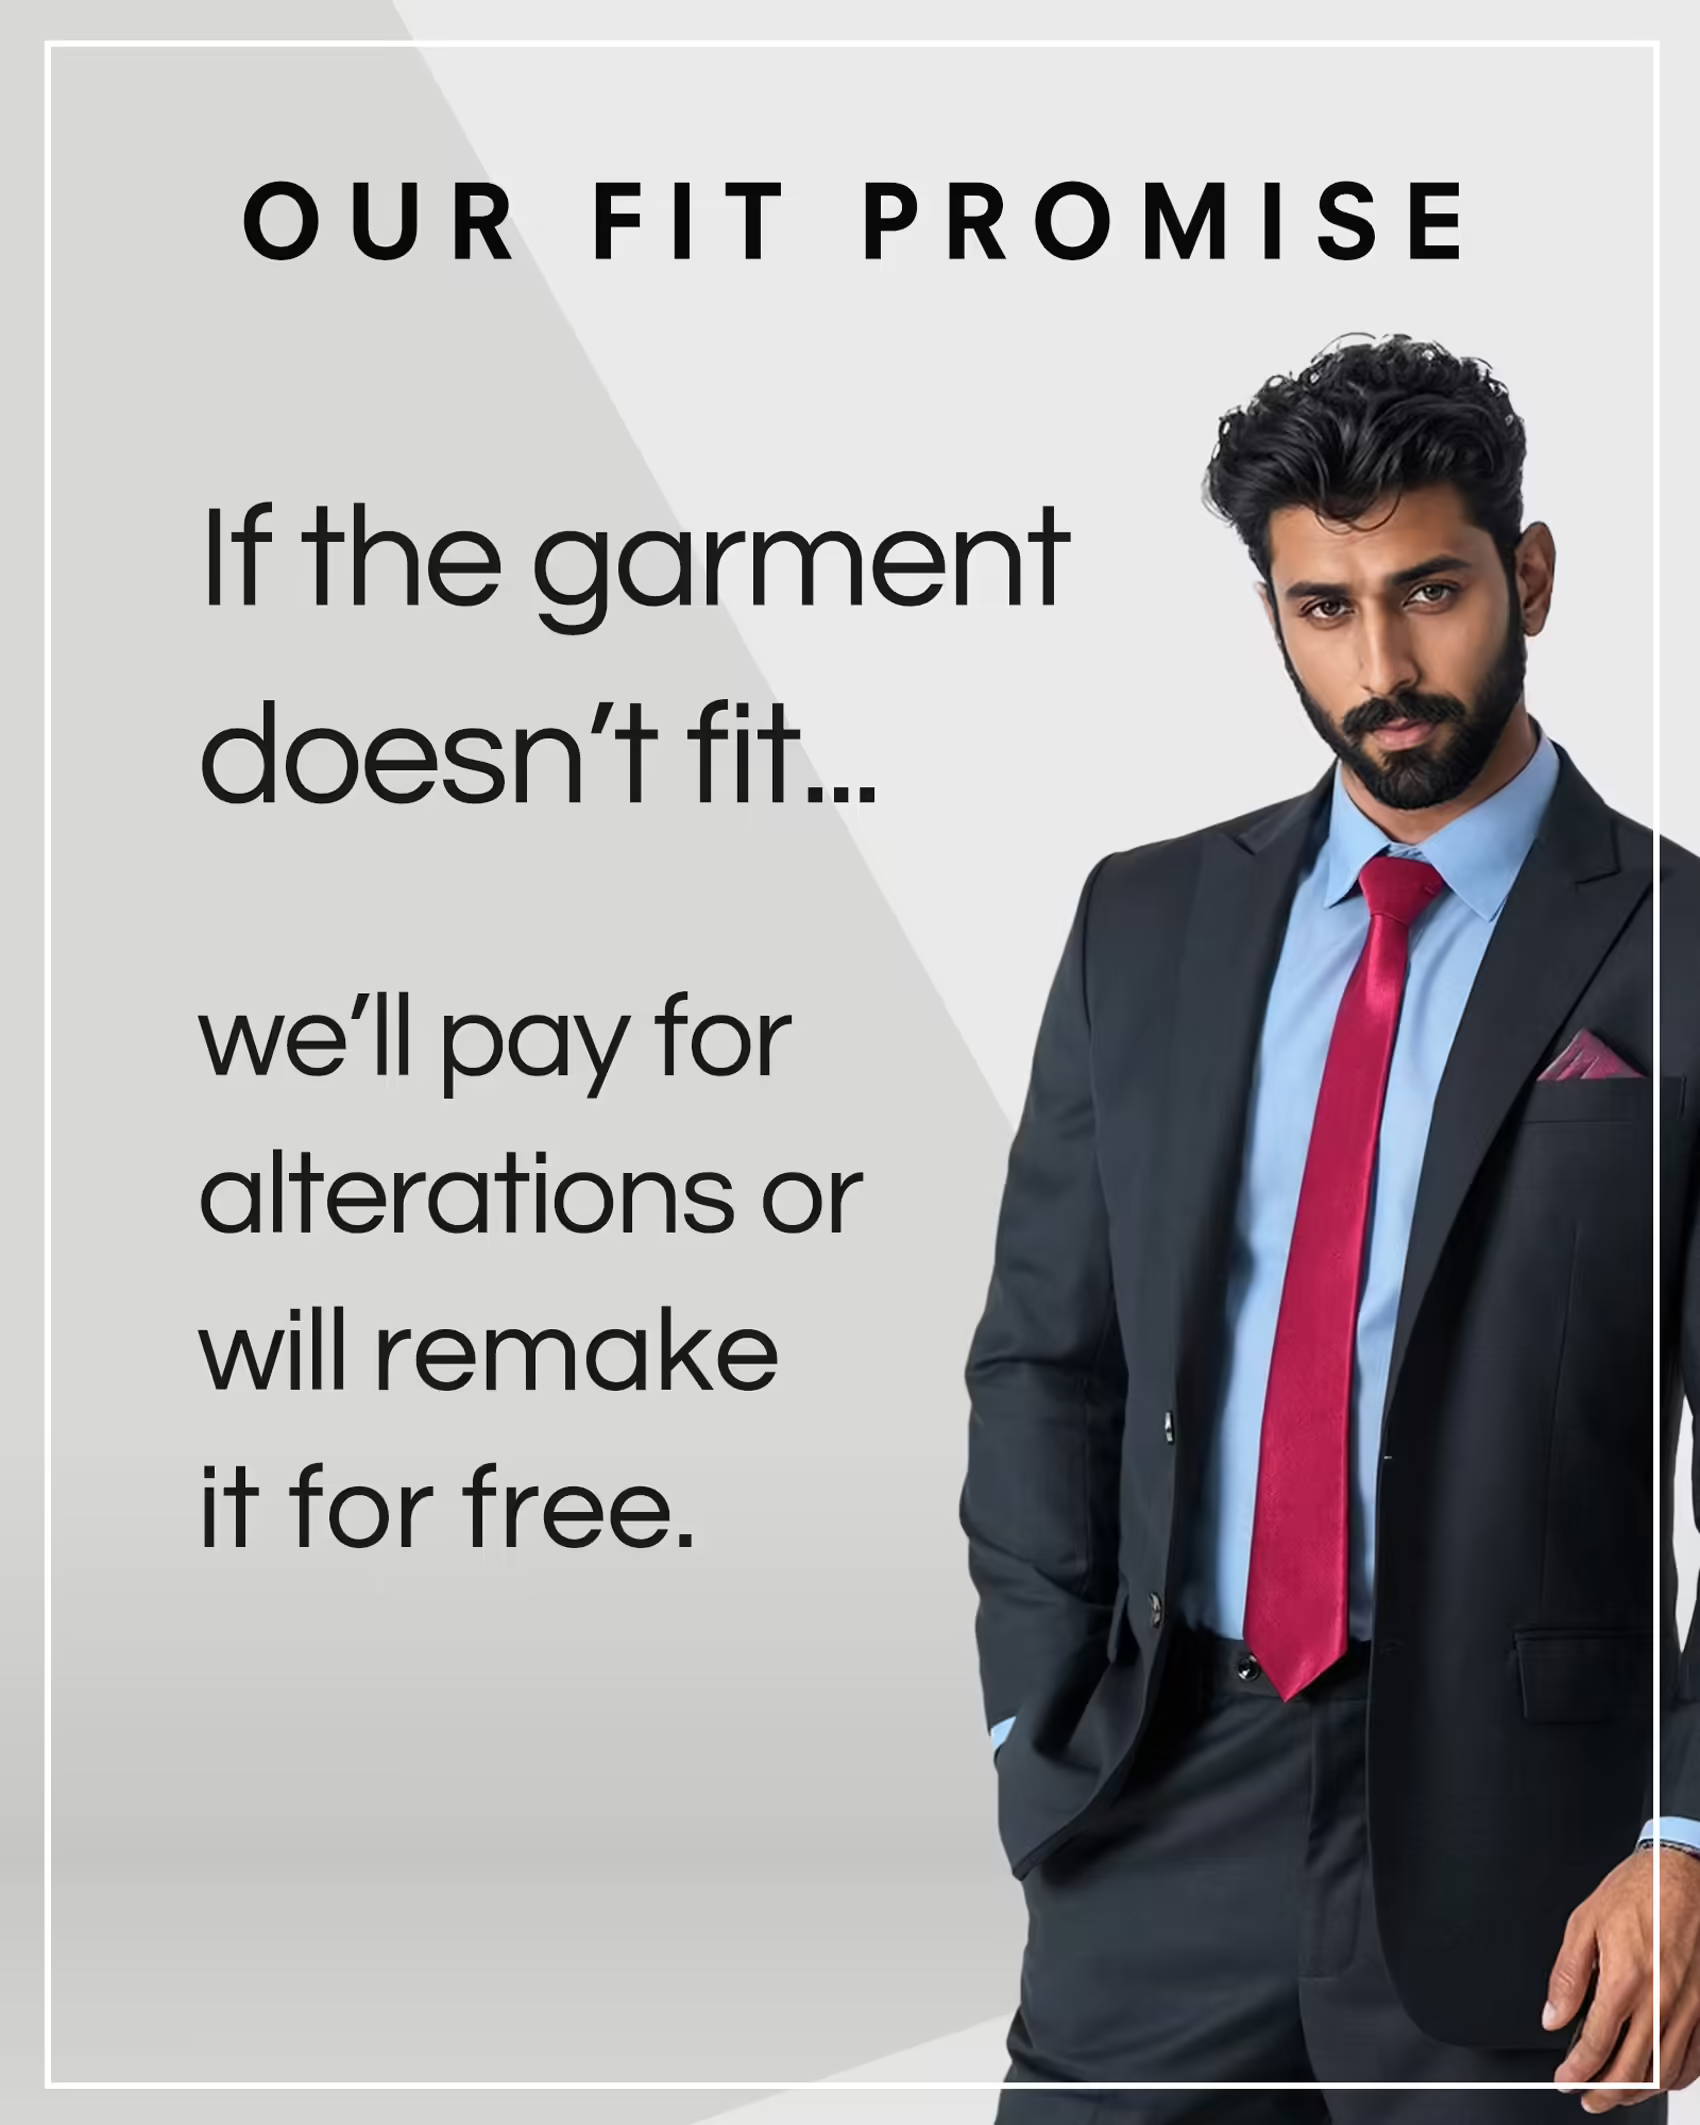 our fit promise graphic - if the garment doesn't fit, we'll pay for alterations